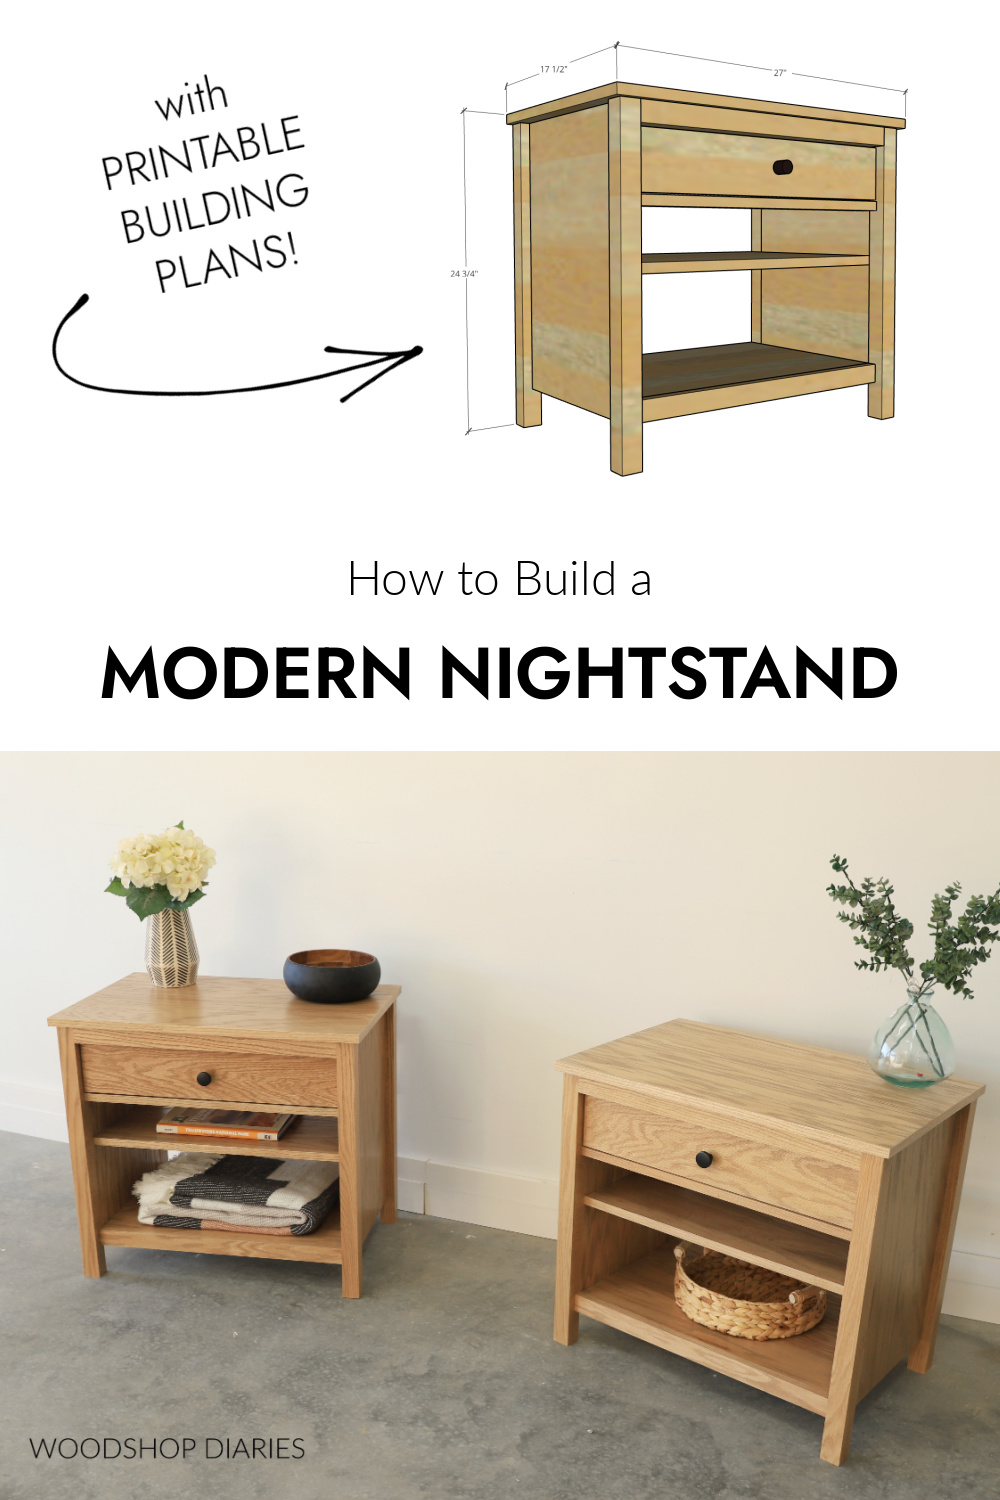 Pinterest collage image showing overall nightstand dimensions at top and pair of completed DIY nightstands at bottom with text "how to build a modern nightstand"